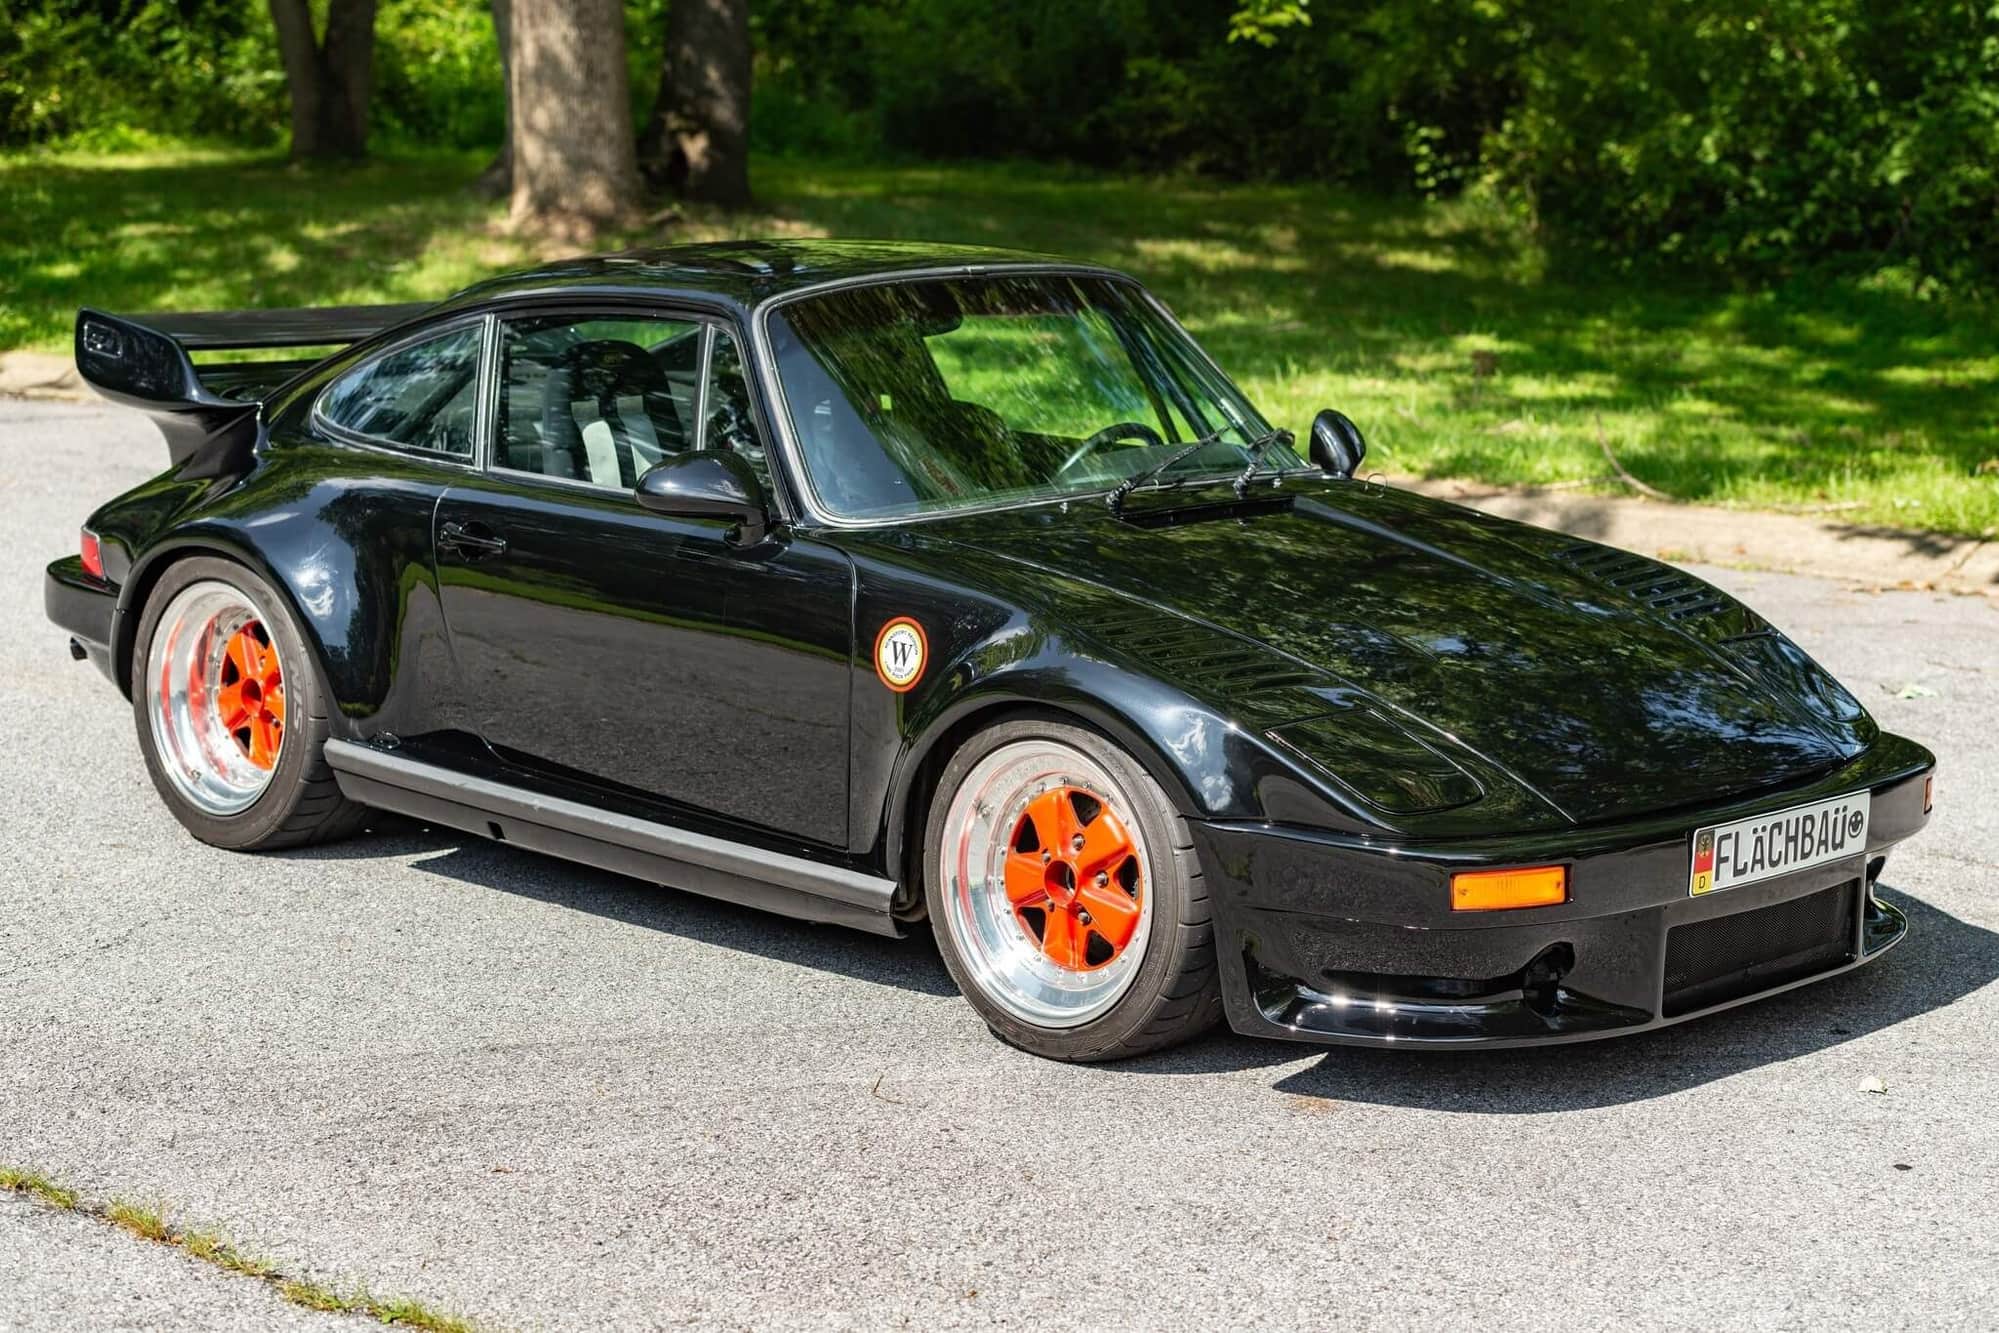 1975 Porsche 911 - PCA Racing 911, 911 Cup, VIntage and F Class AND it's street registared! - Used - VIN 9115202103 - 100,000 Miles - 6 cyl - 2WD - Manual - Coupe - Black - Wilmington, DE 19807, United States